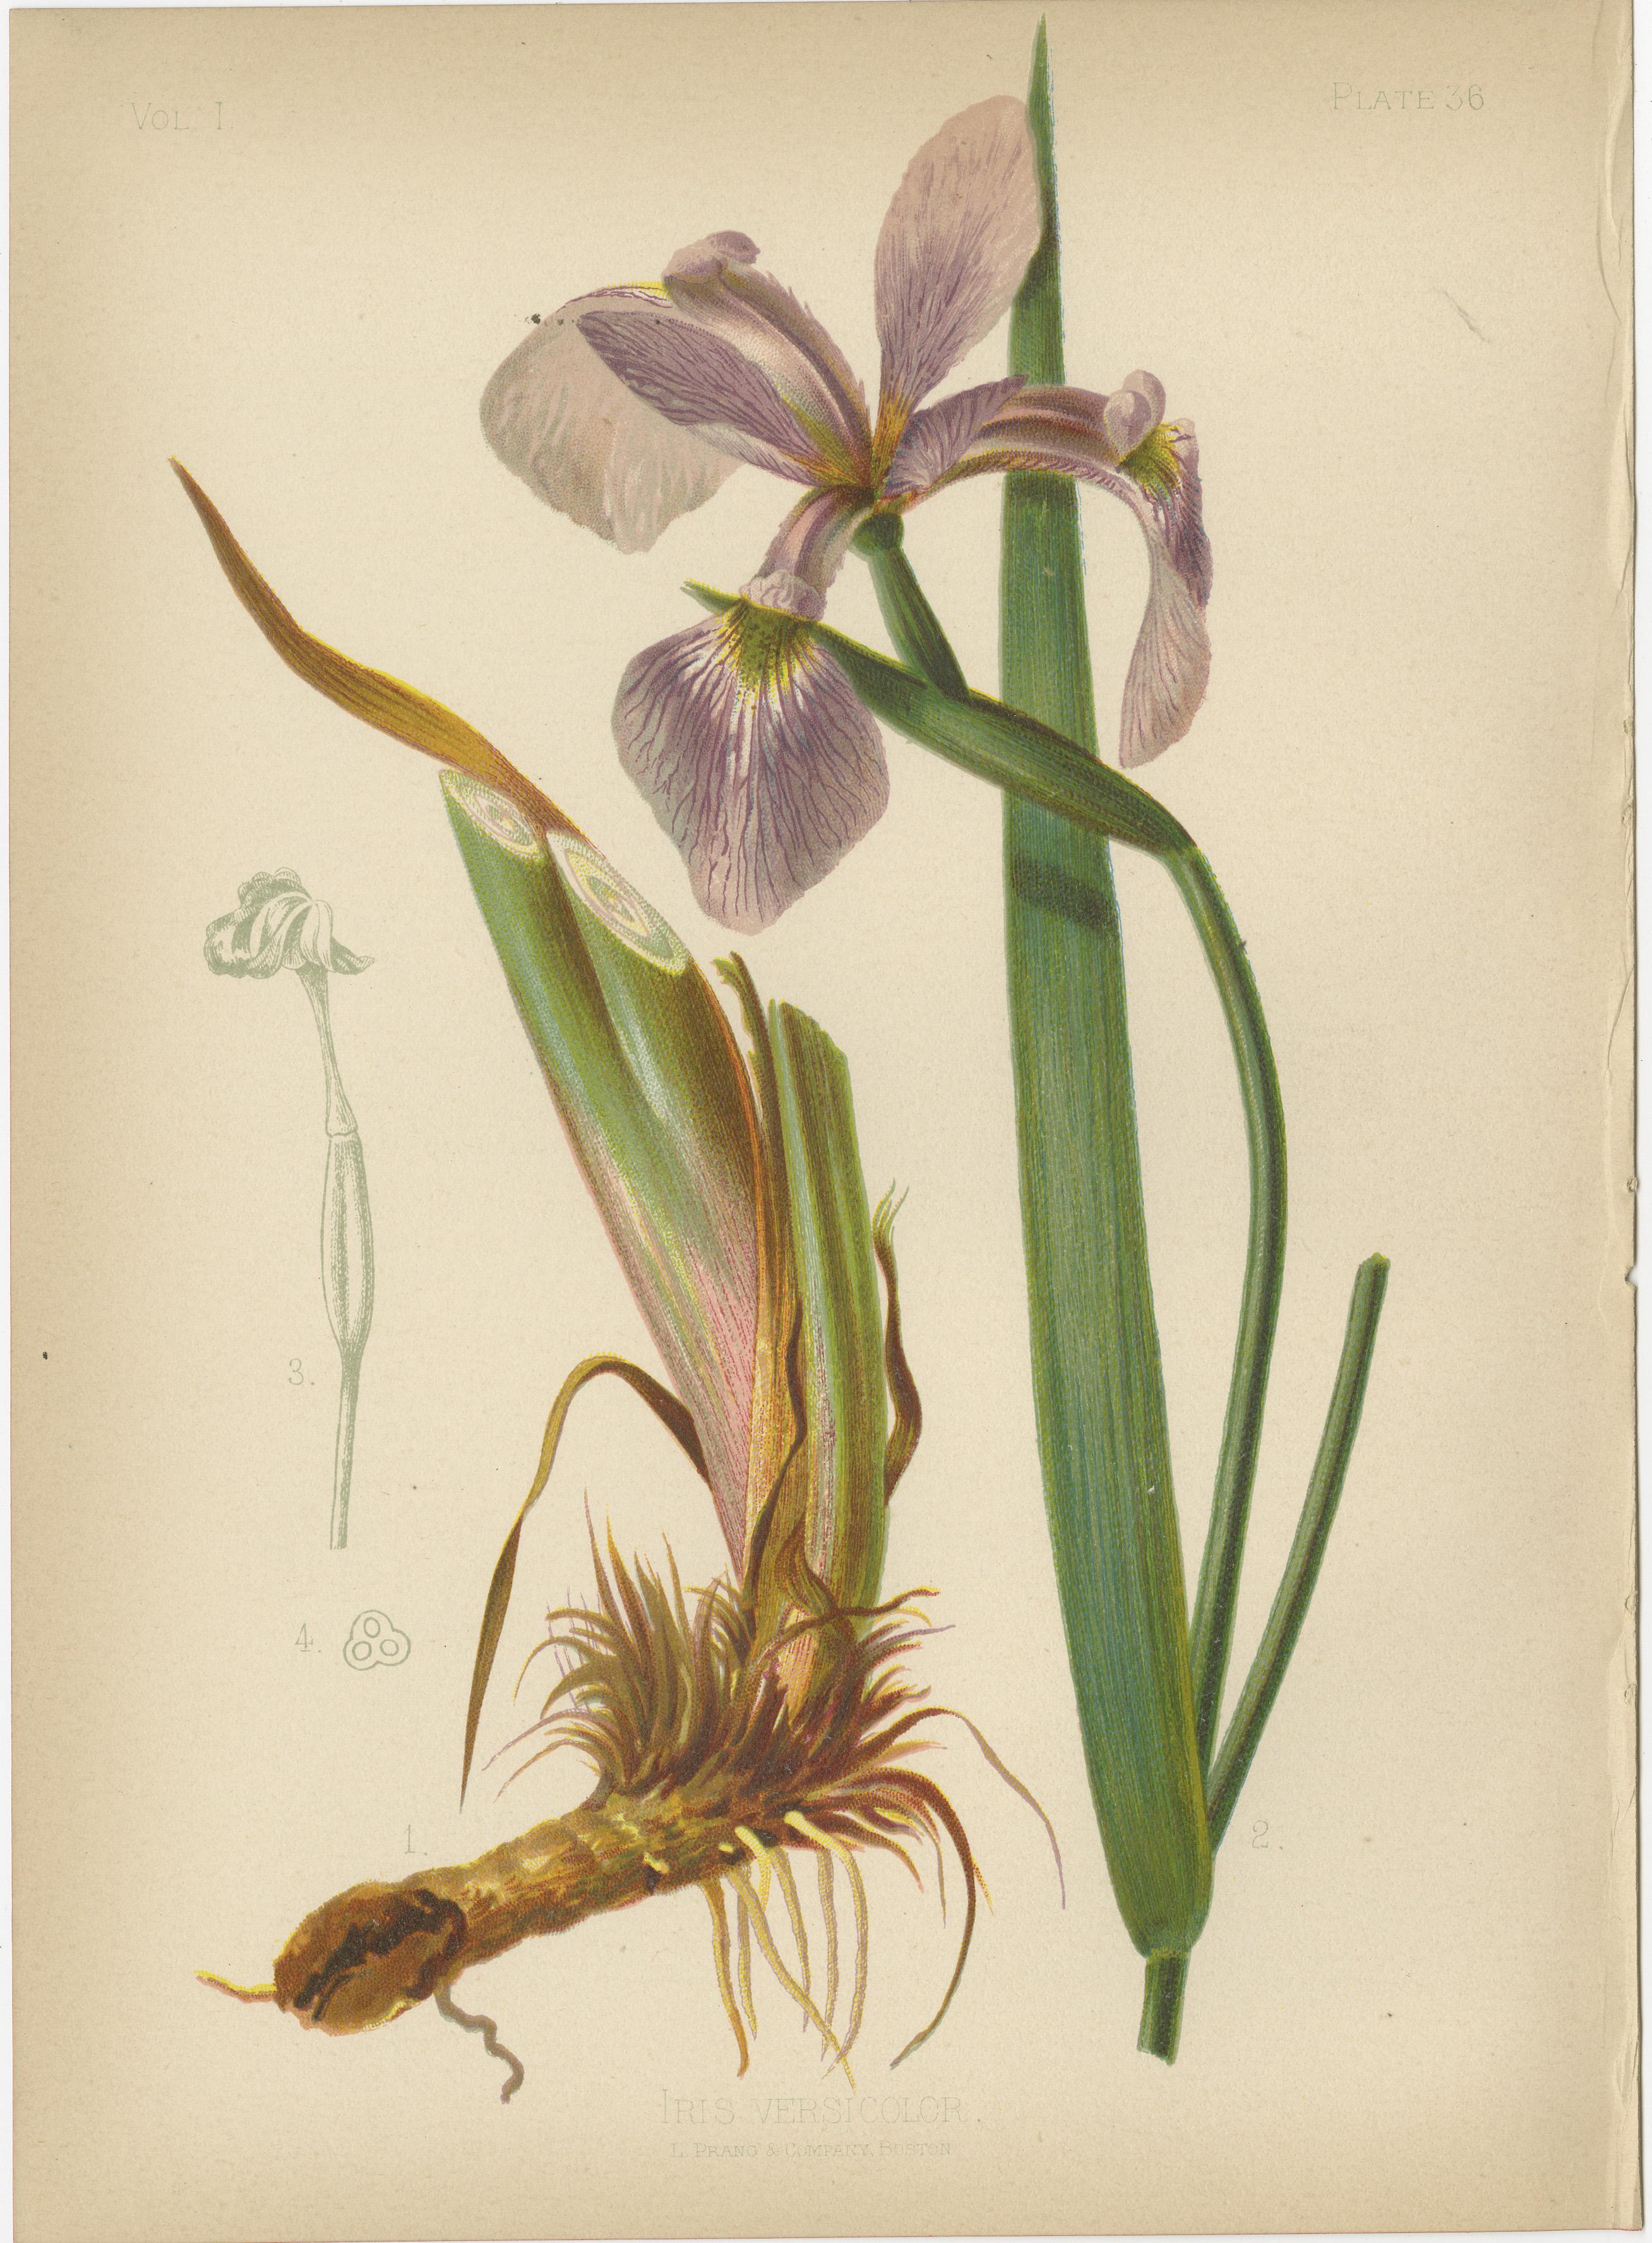 The image displays a collection of six chromolithographs depicting various plant species. These illustrations are characterized by their botanical accuracy and aesthetic appeal, typical of late 19th-century natural history publications. 

Each plate